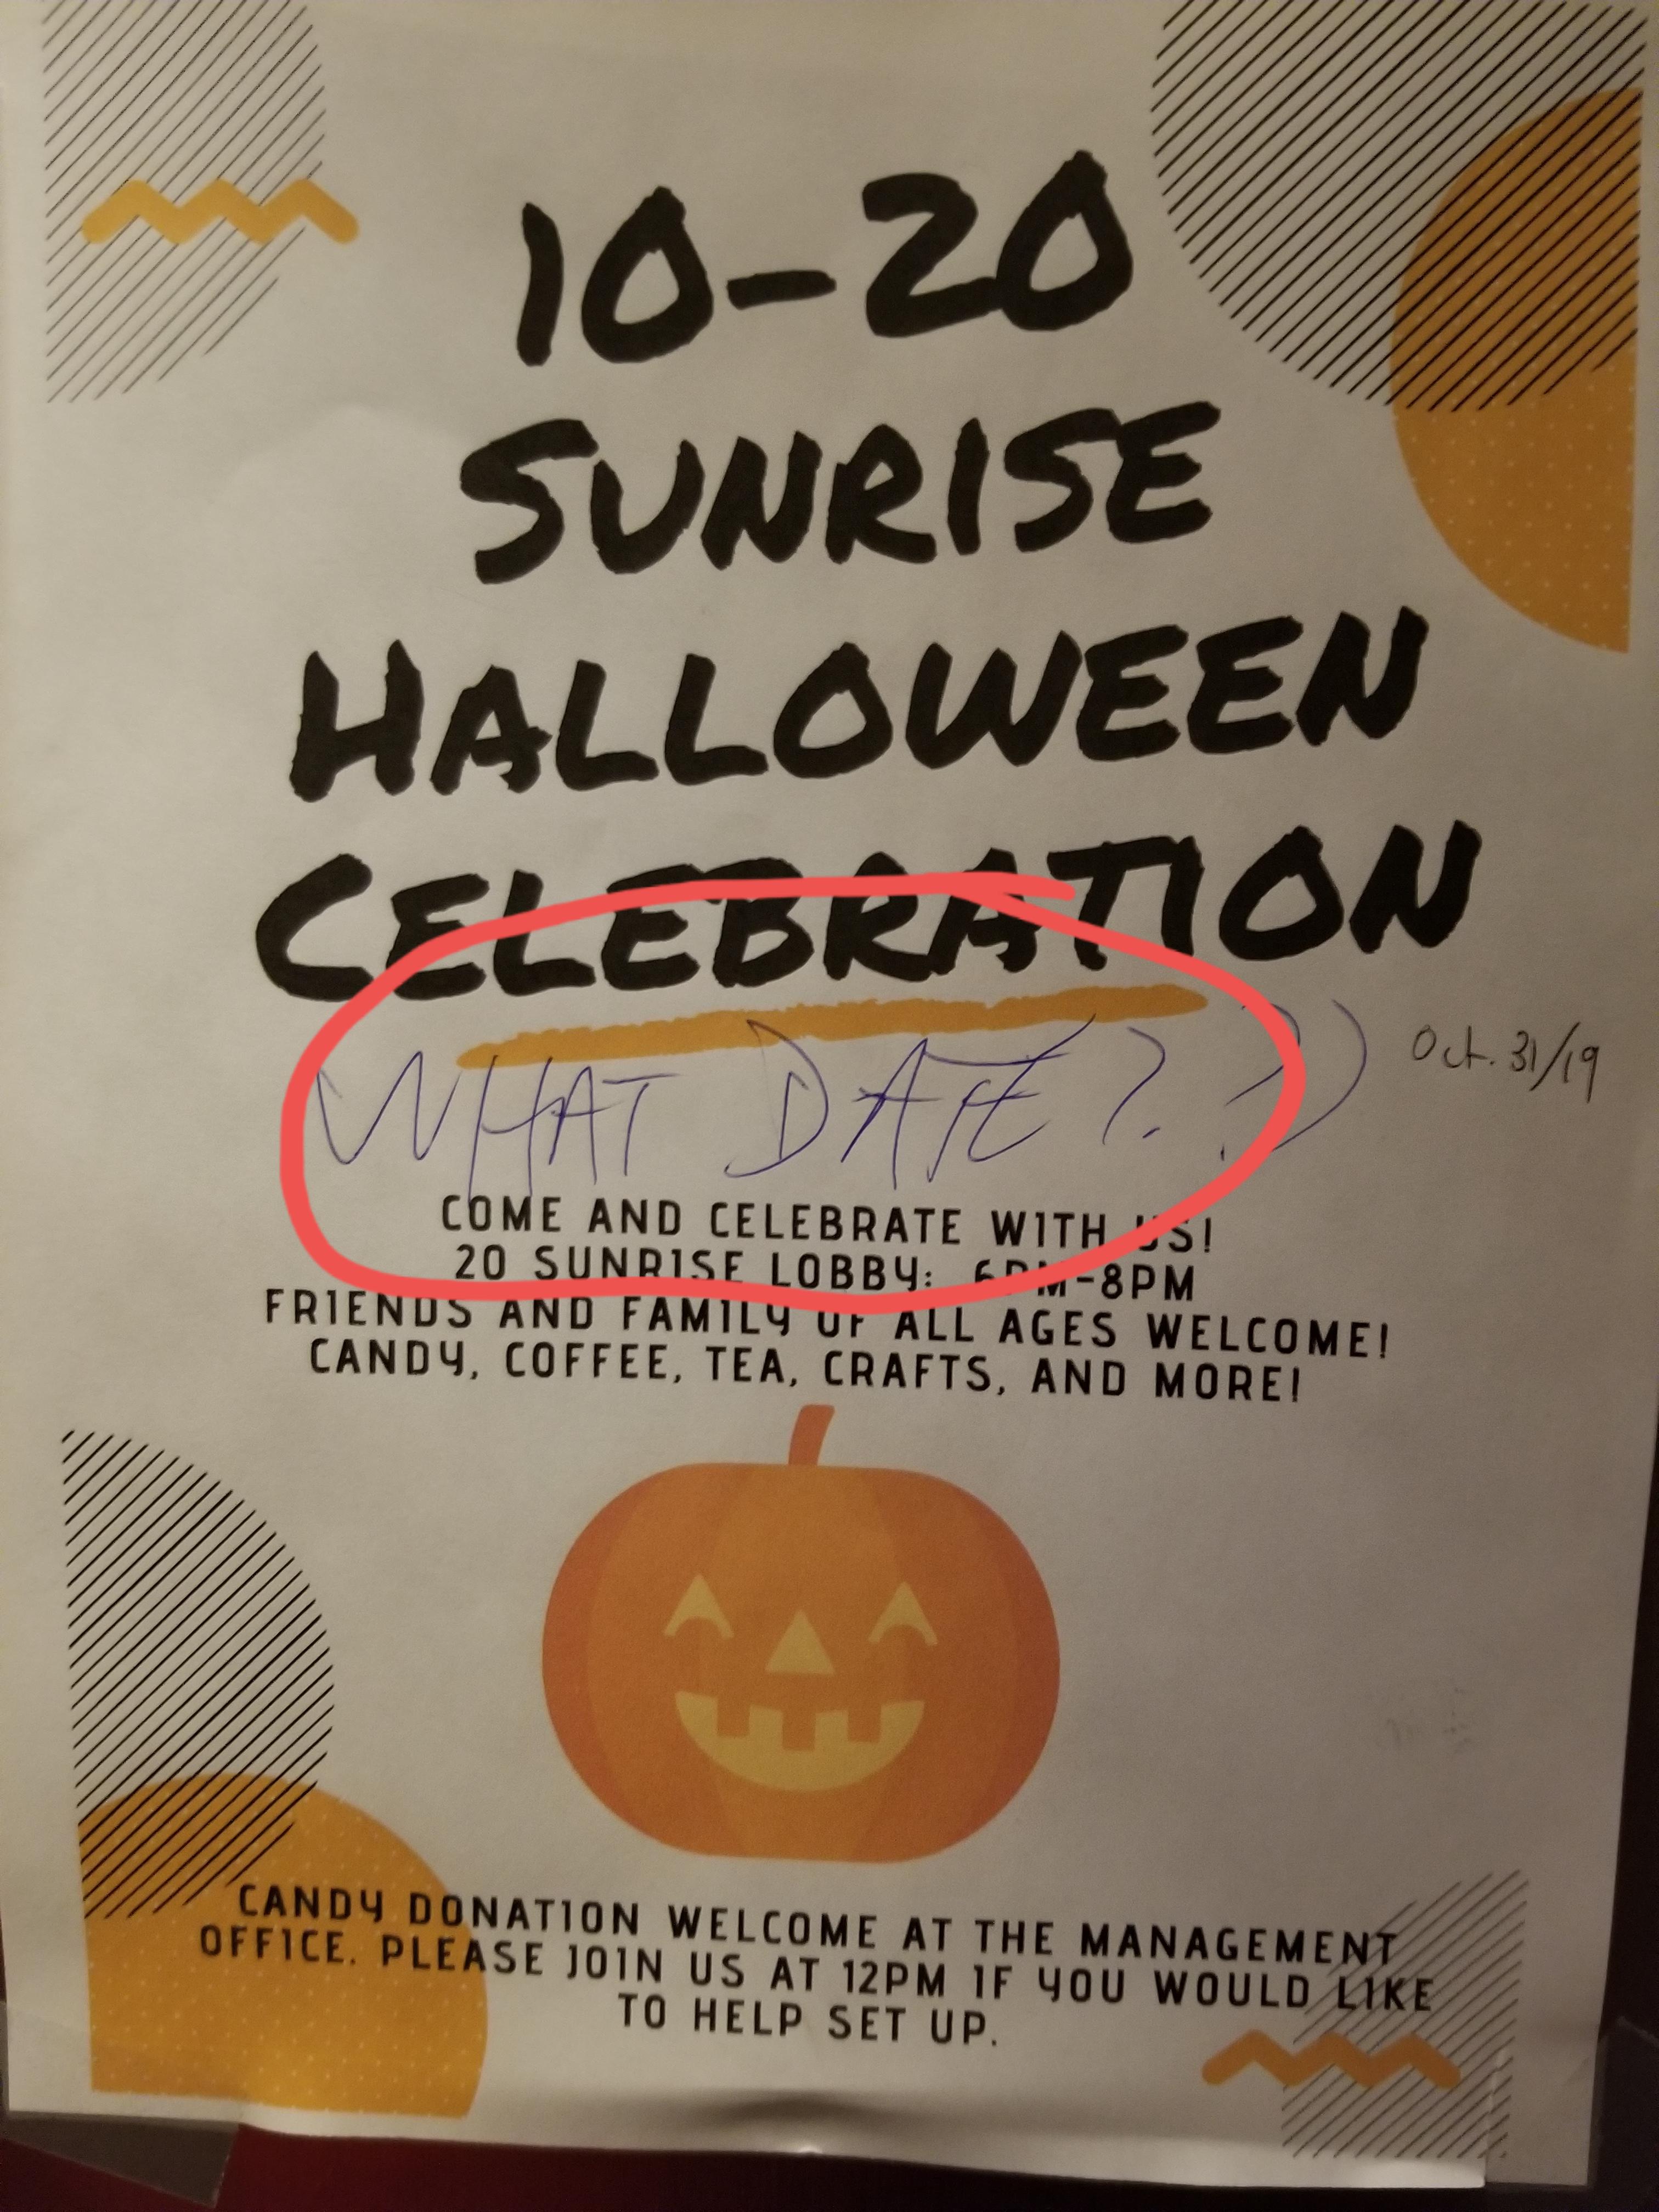 orange - 1020 Sunrise Halloween Celebration Och 319 What Dat Come And Celebrate With Us! 20 Sundise Lobby E Sp Frienus And Family Uf All Ages Welcome! Candy, Coffee. Tea, Crafts, And More! Candy Donation Welcome At The Management Office Please Join Us At 